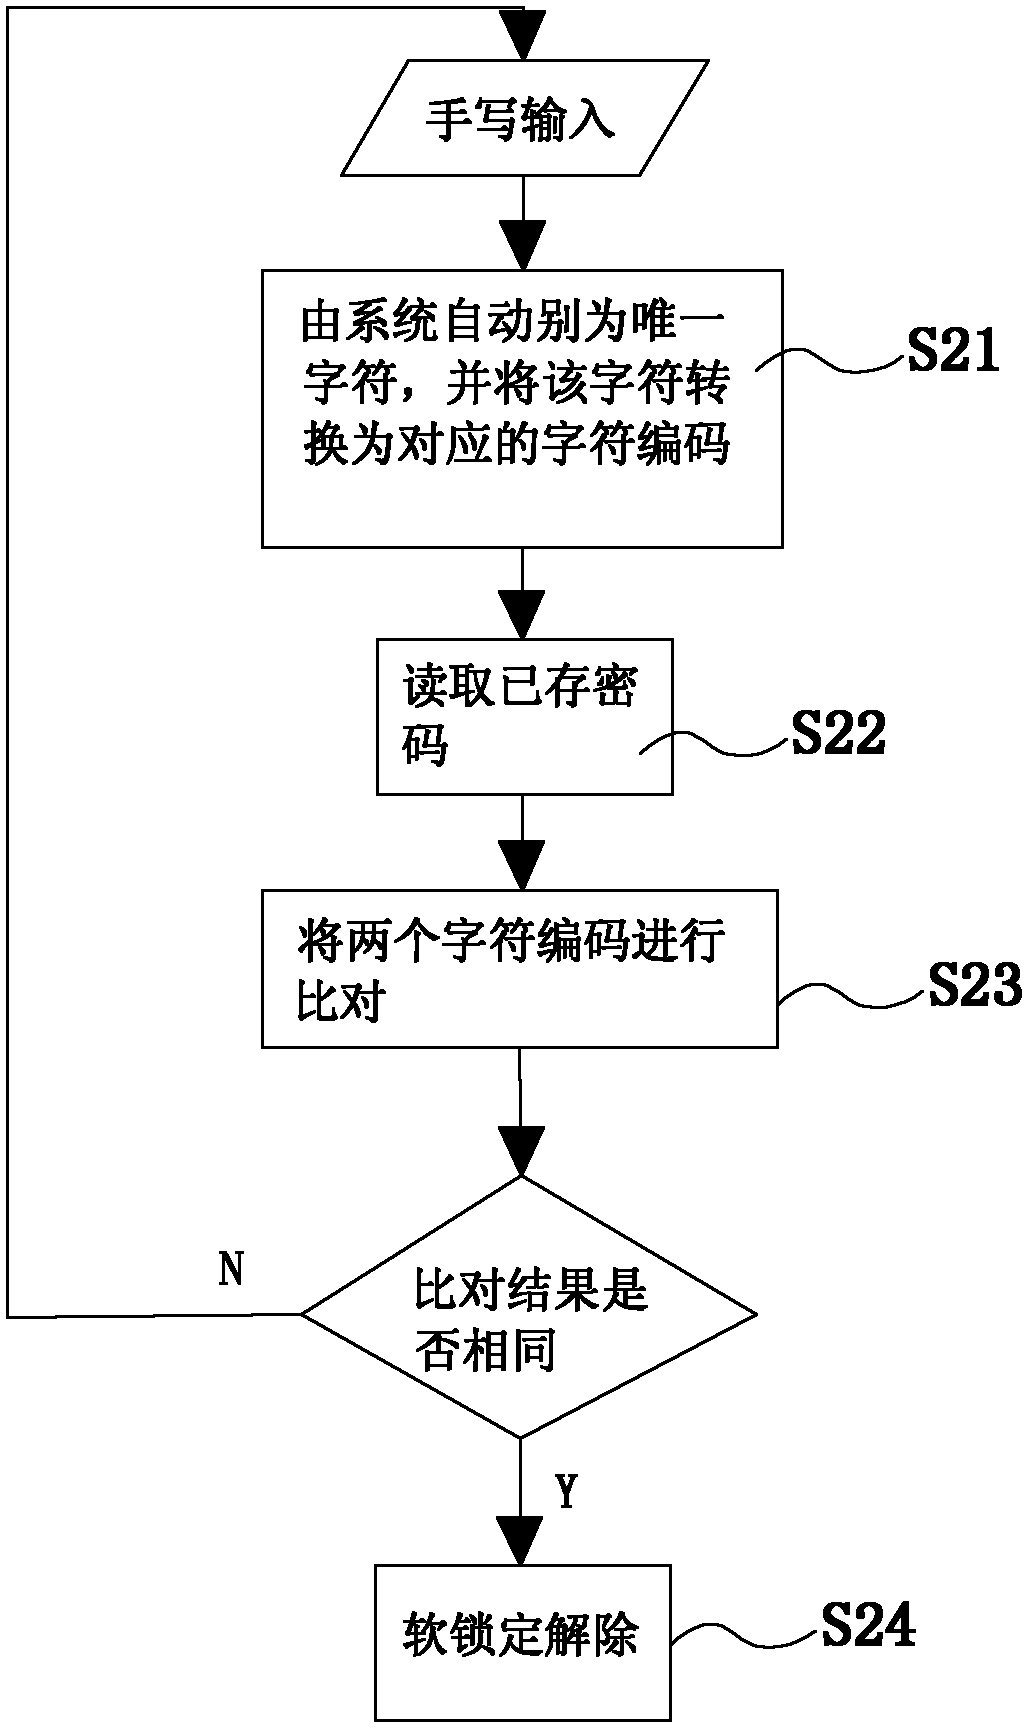 Touch screen mobile device, and method and system for soft locking password setup and unlocking for touch screen mobile device